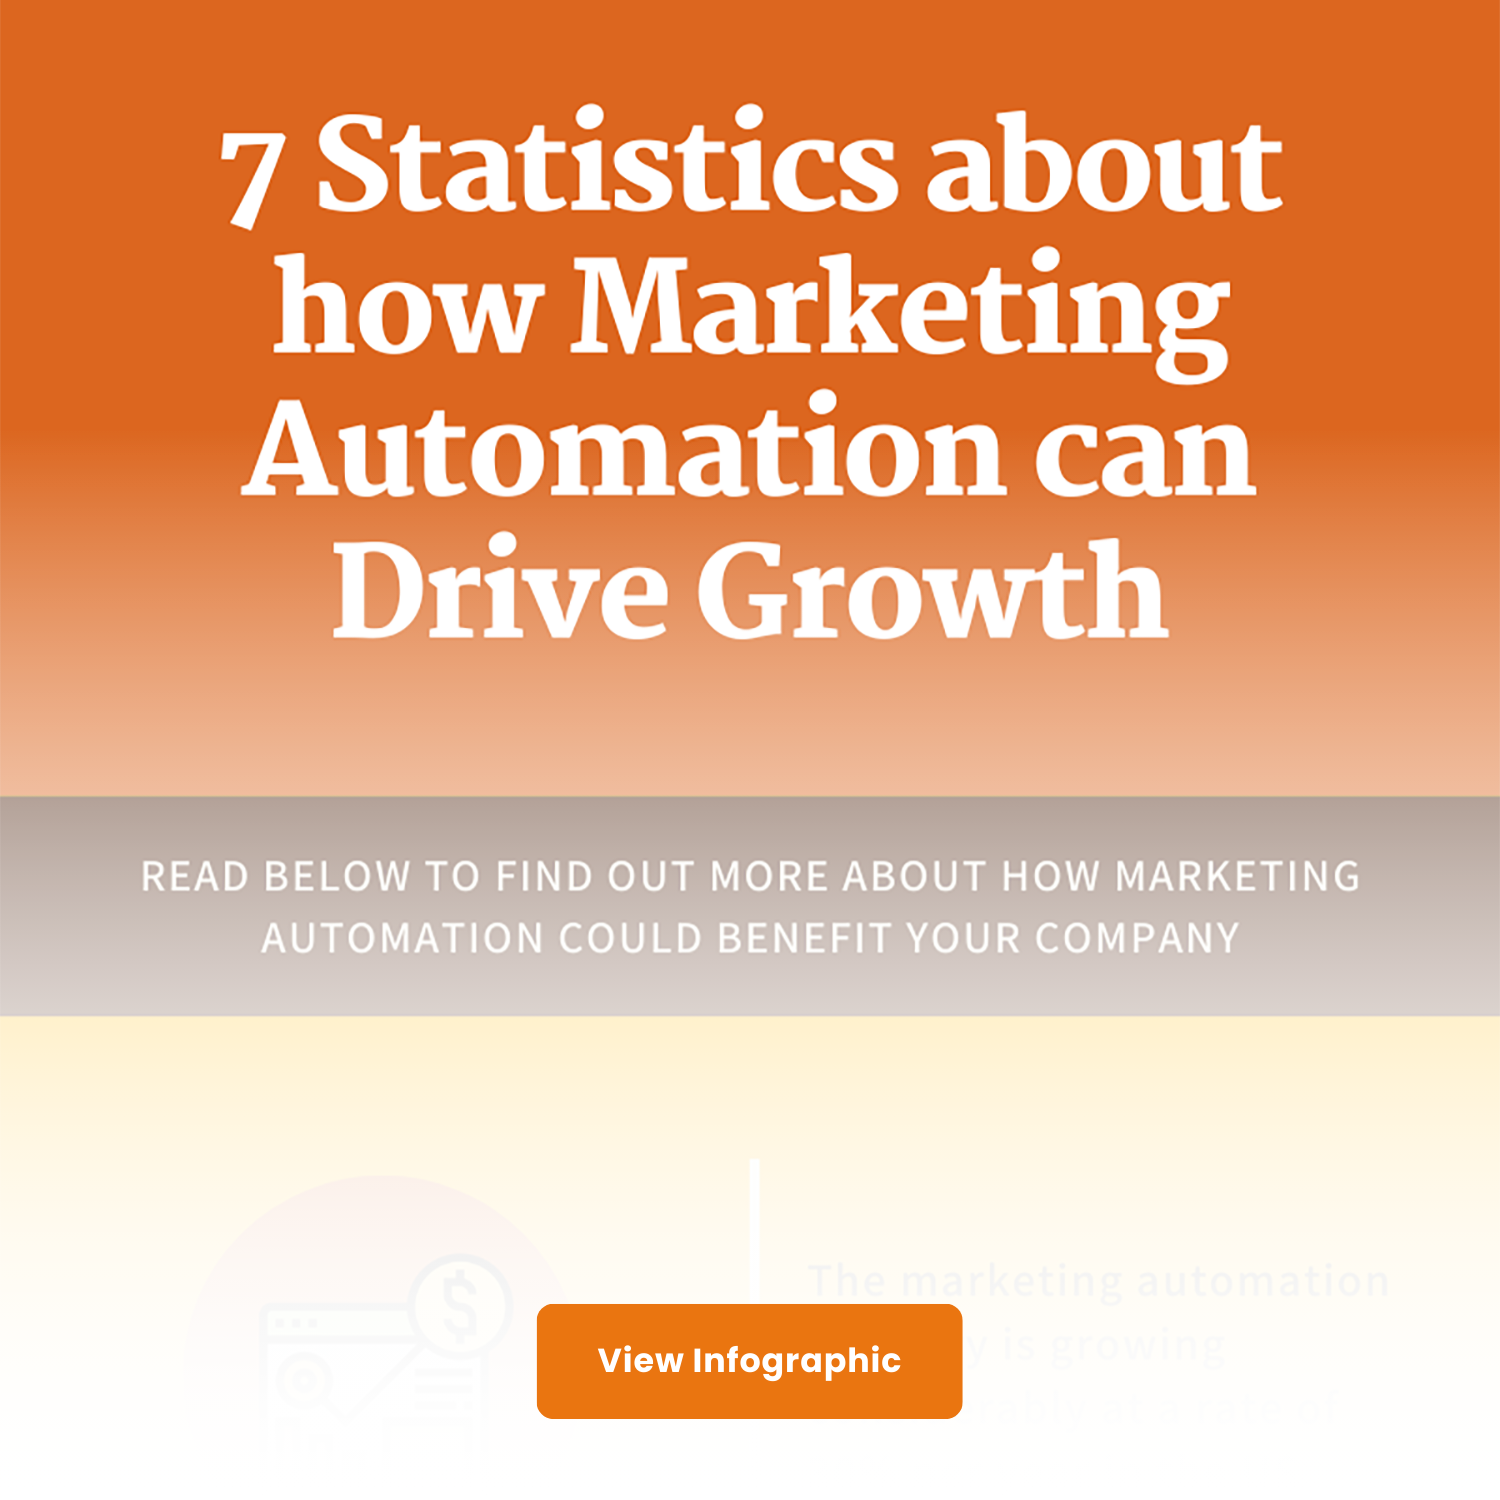 Marketing Automation Stats infographic